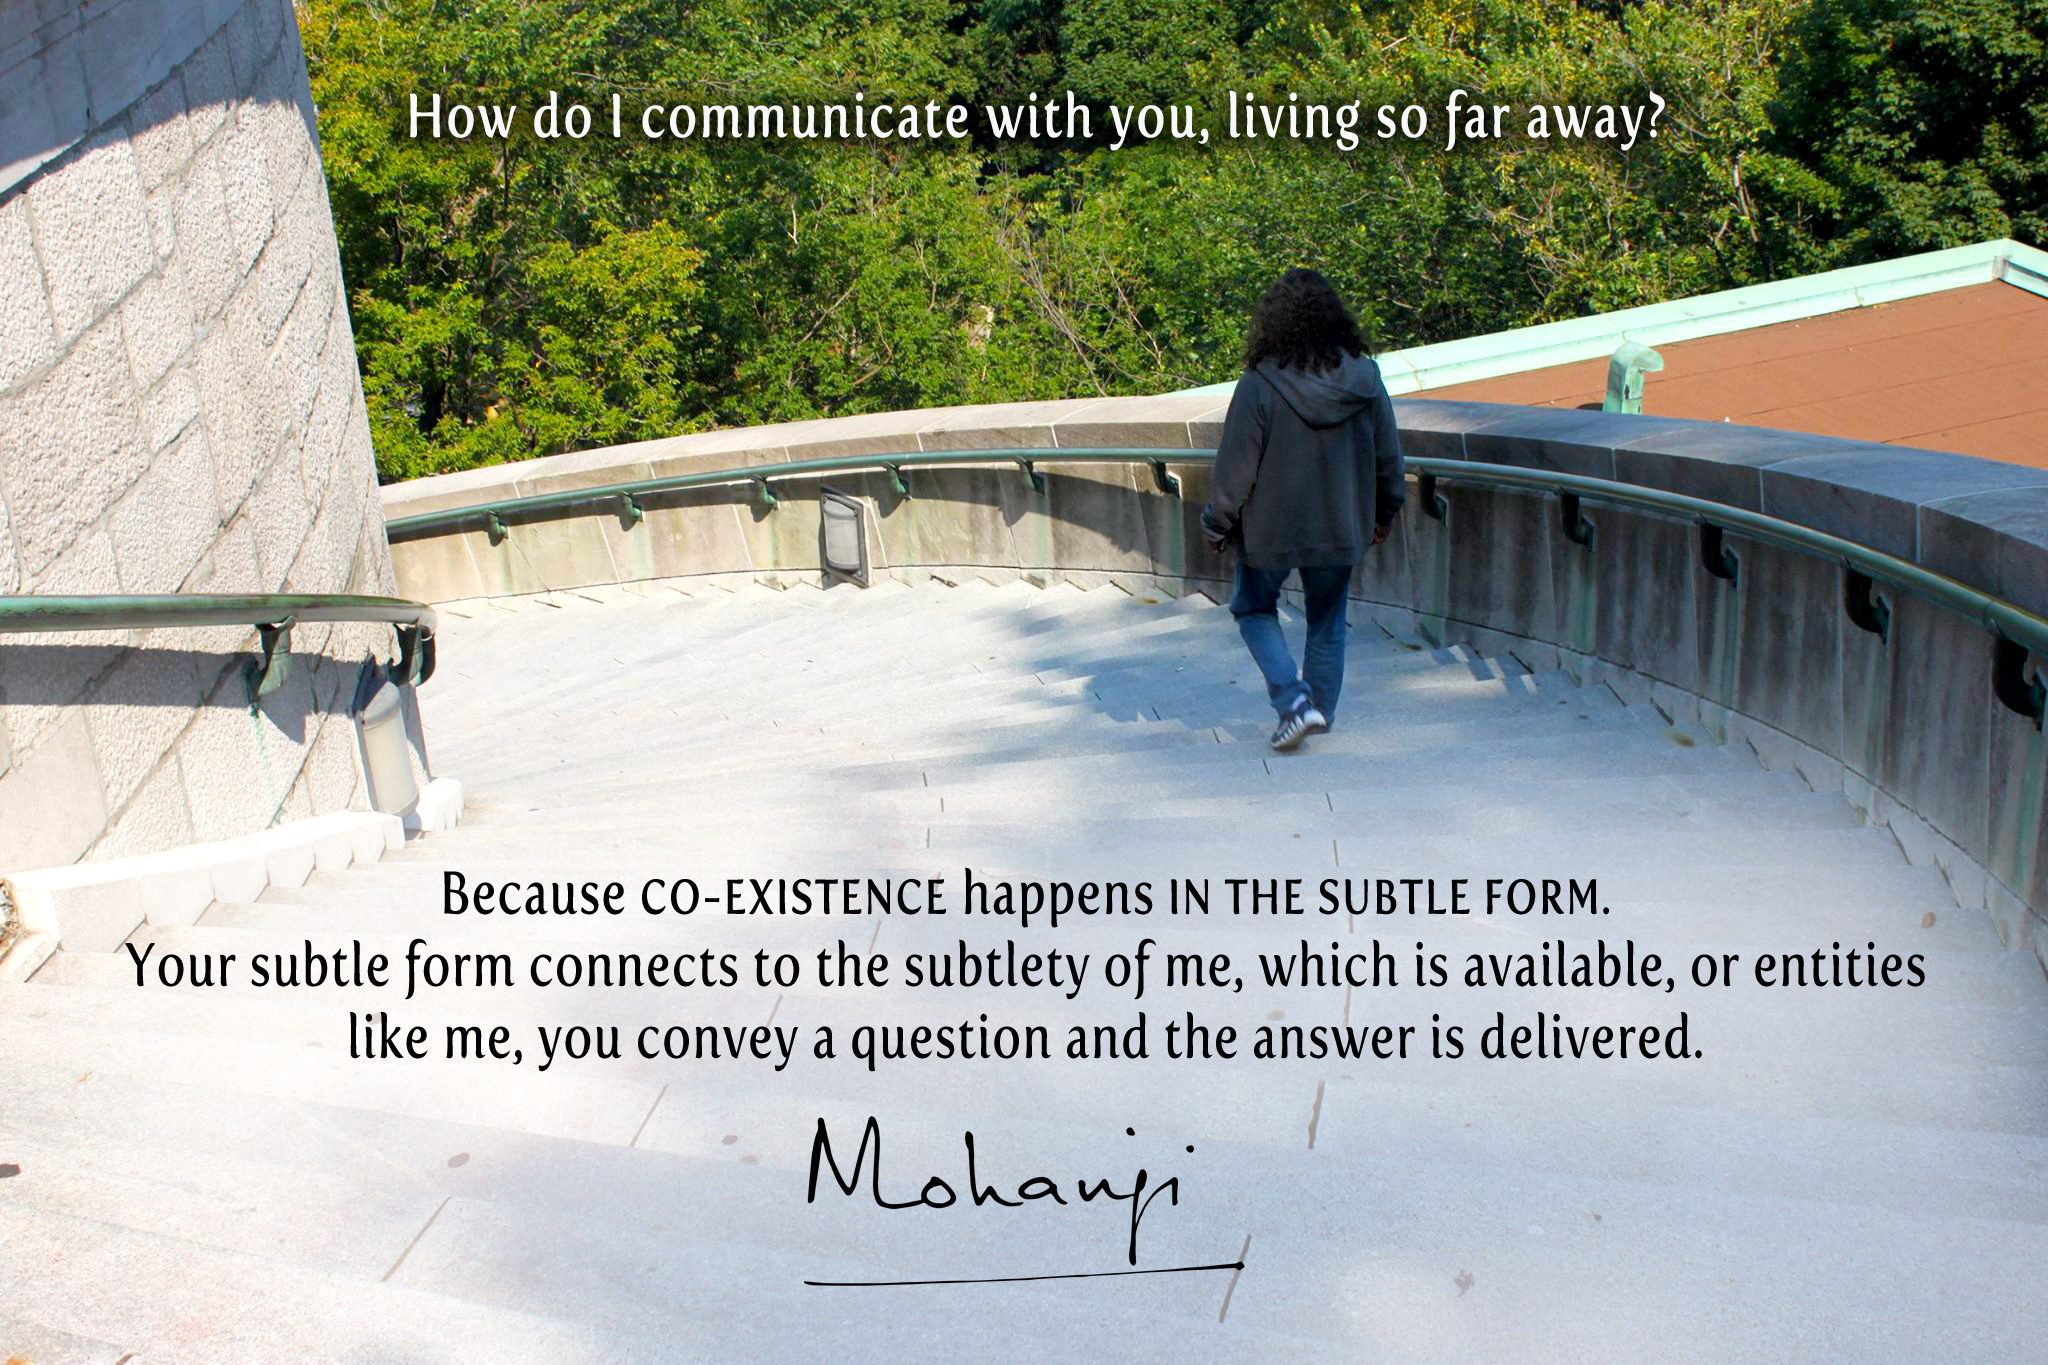 Mohanji quote - How do I communicate with you when you are far away